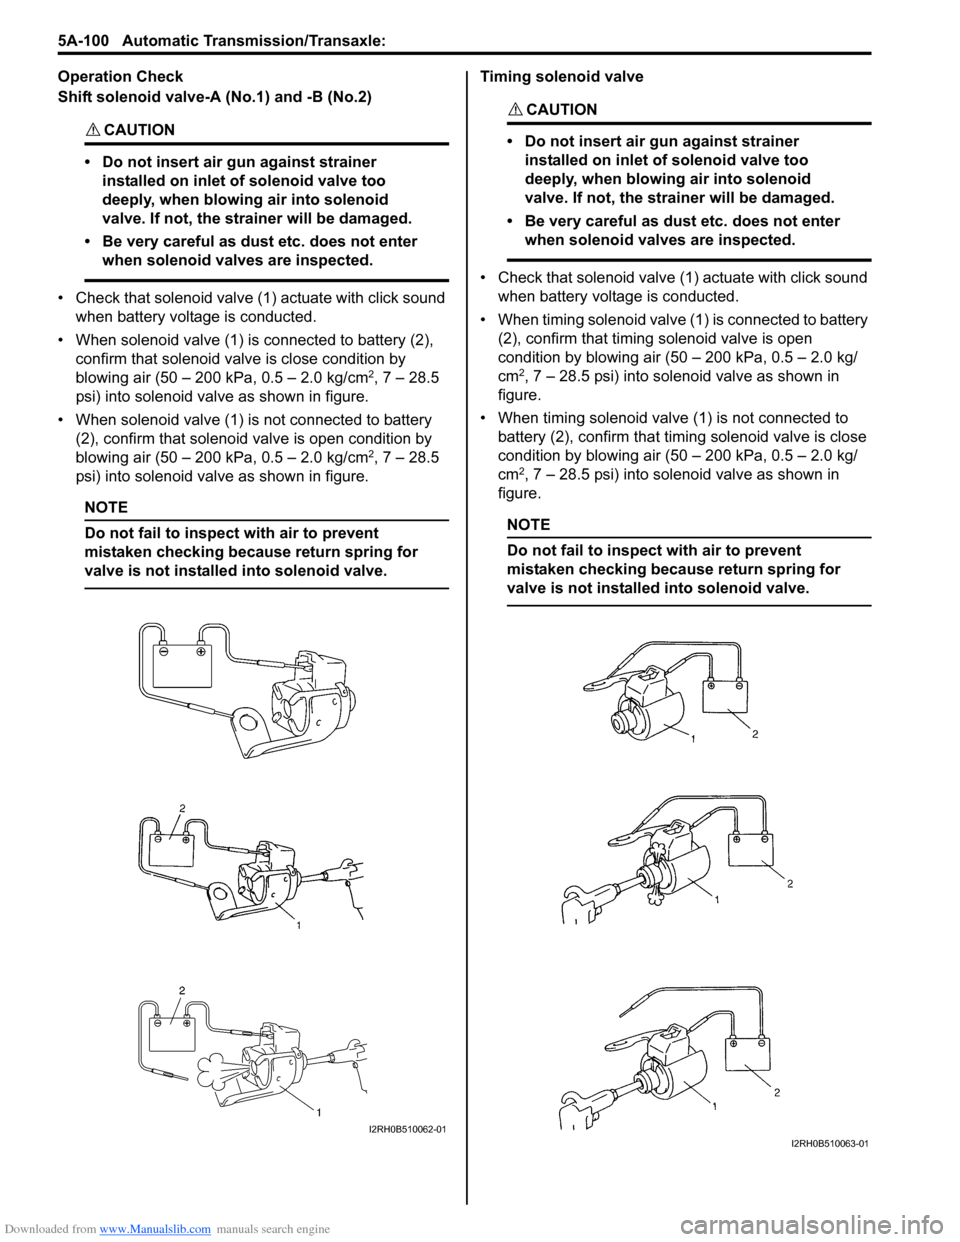 SUZUKI SWIFT 2008 2.G Service Workshop Manual Downloaded from www.Manualslib.com manuals search engine 5A-100 Automatic Transmission/Transaxle: 
Operation Check
Shift solenoid valve-A (No.1) and -B (No.2)
CAUTION! 
• Do not insert air gun again